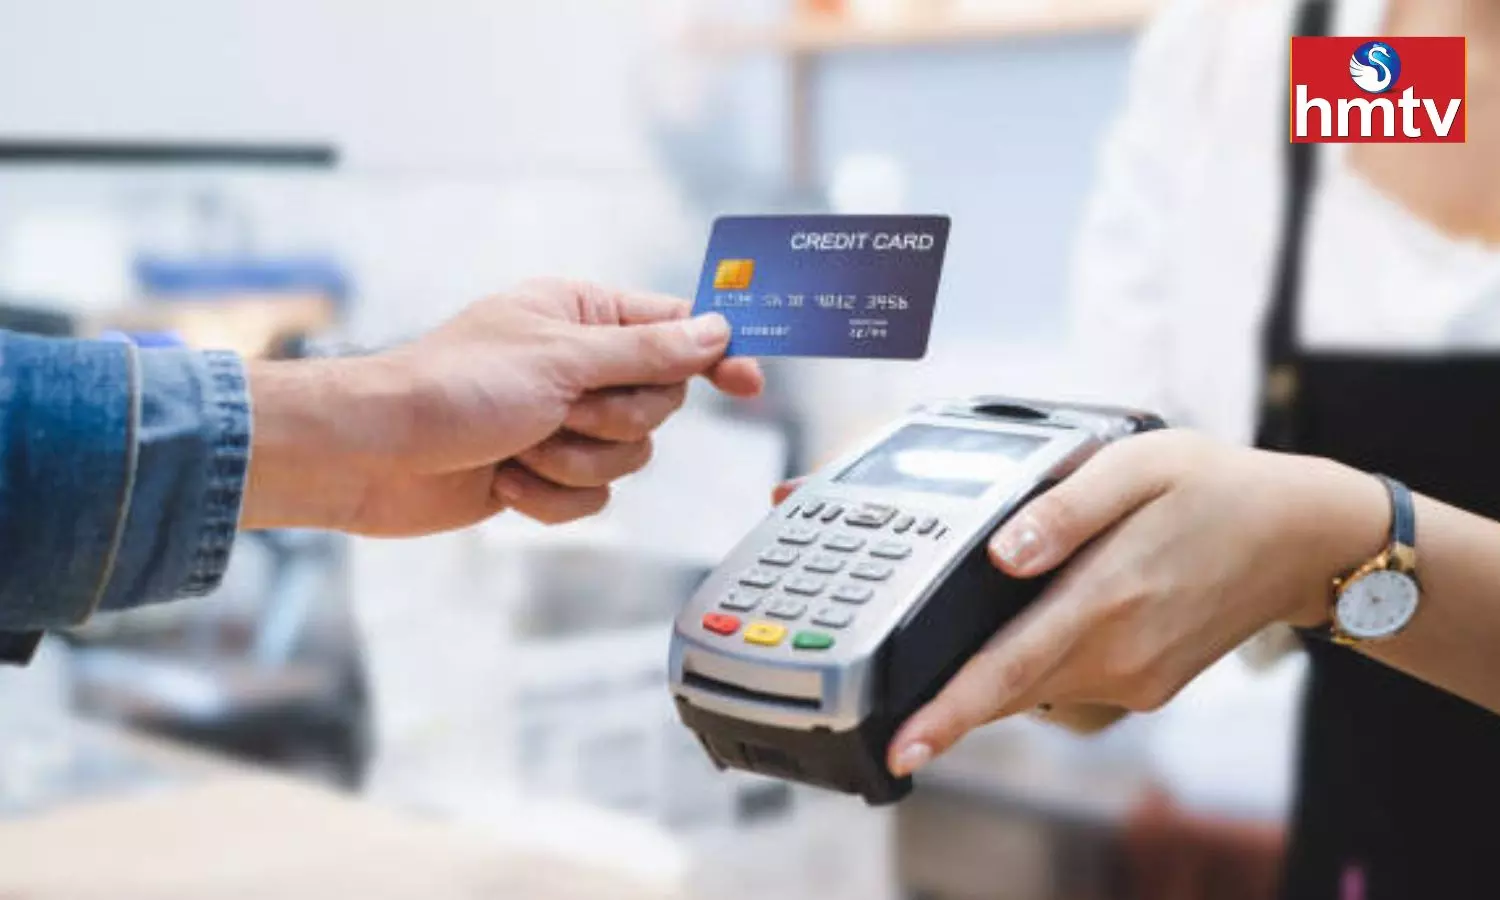 Be Careful About Credit Card Payments Otherwise the Account Will be Empty